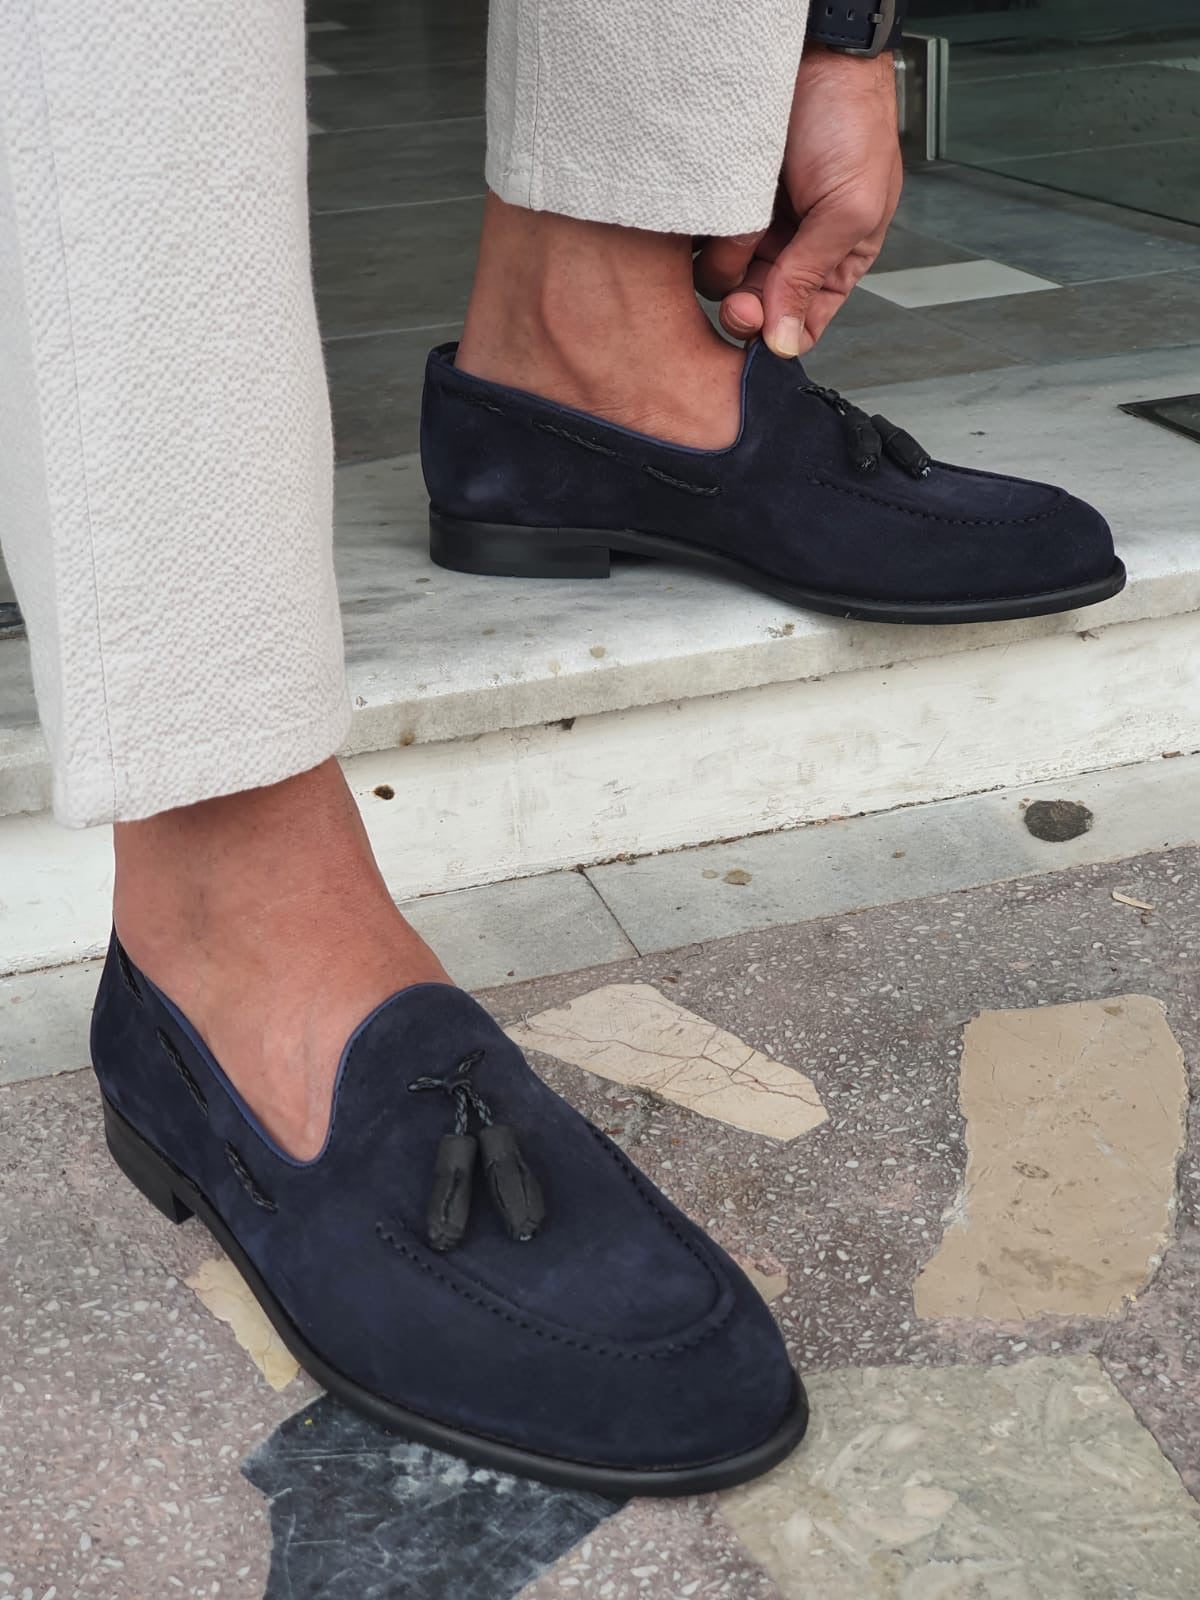 Blue suede Tassel Loafer  Made in Spain by Cambrillón Bespoke Leather